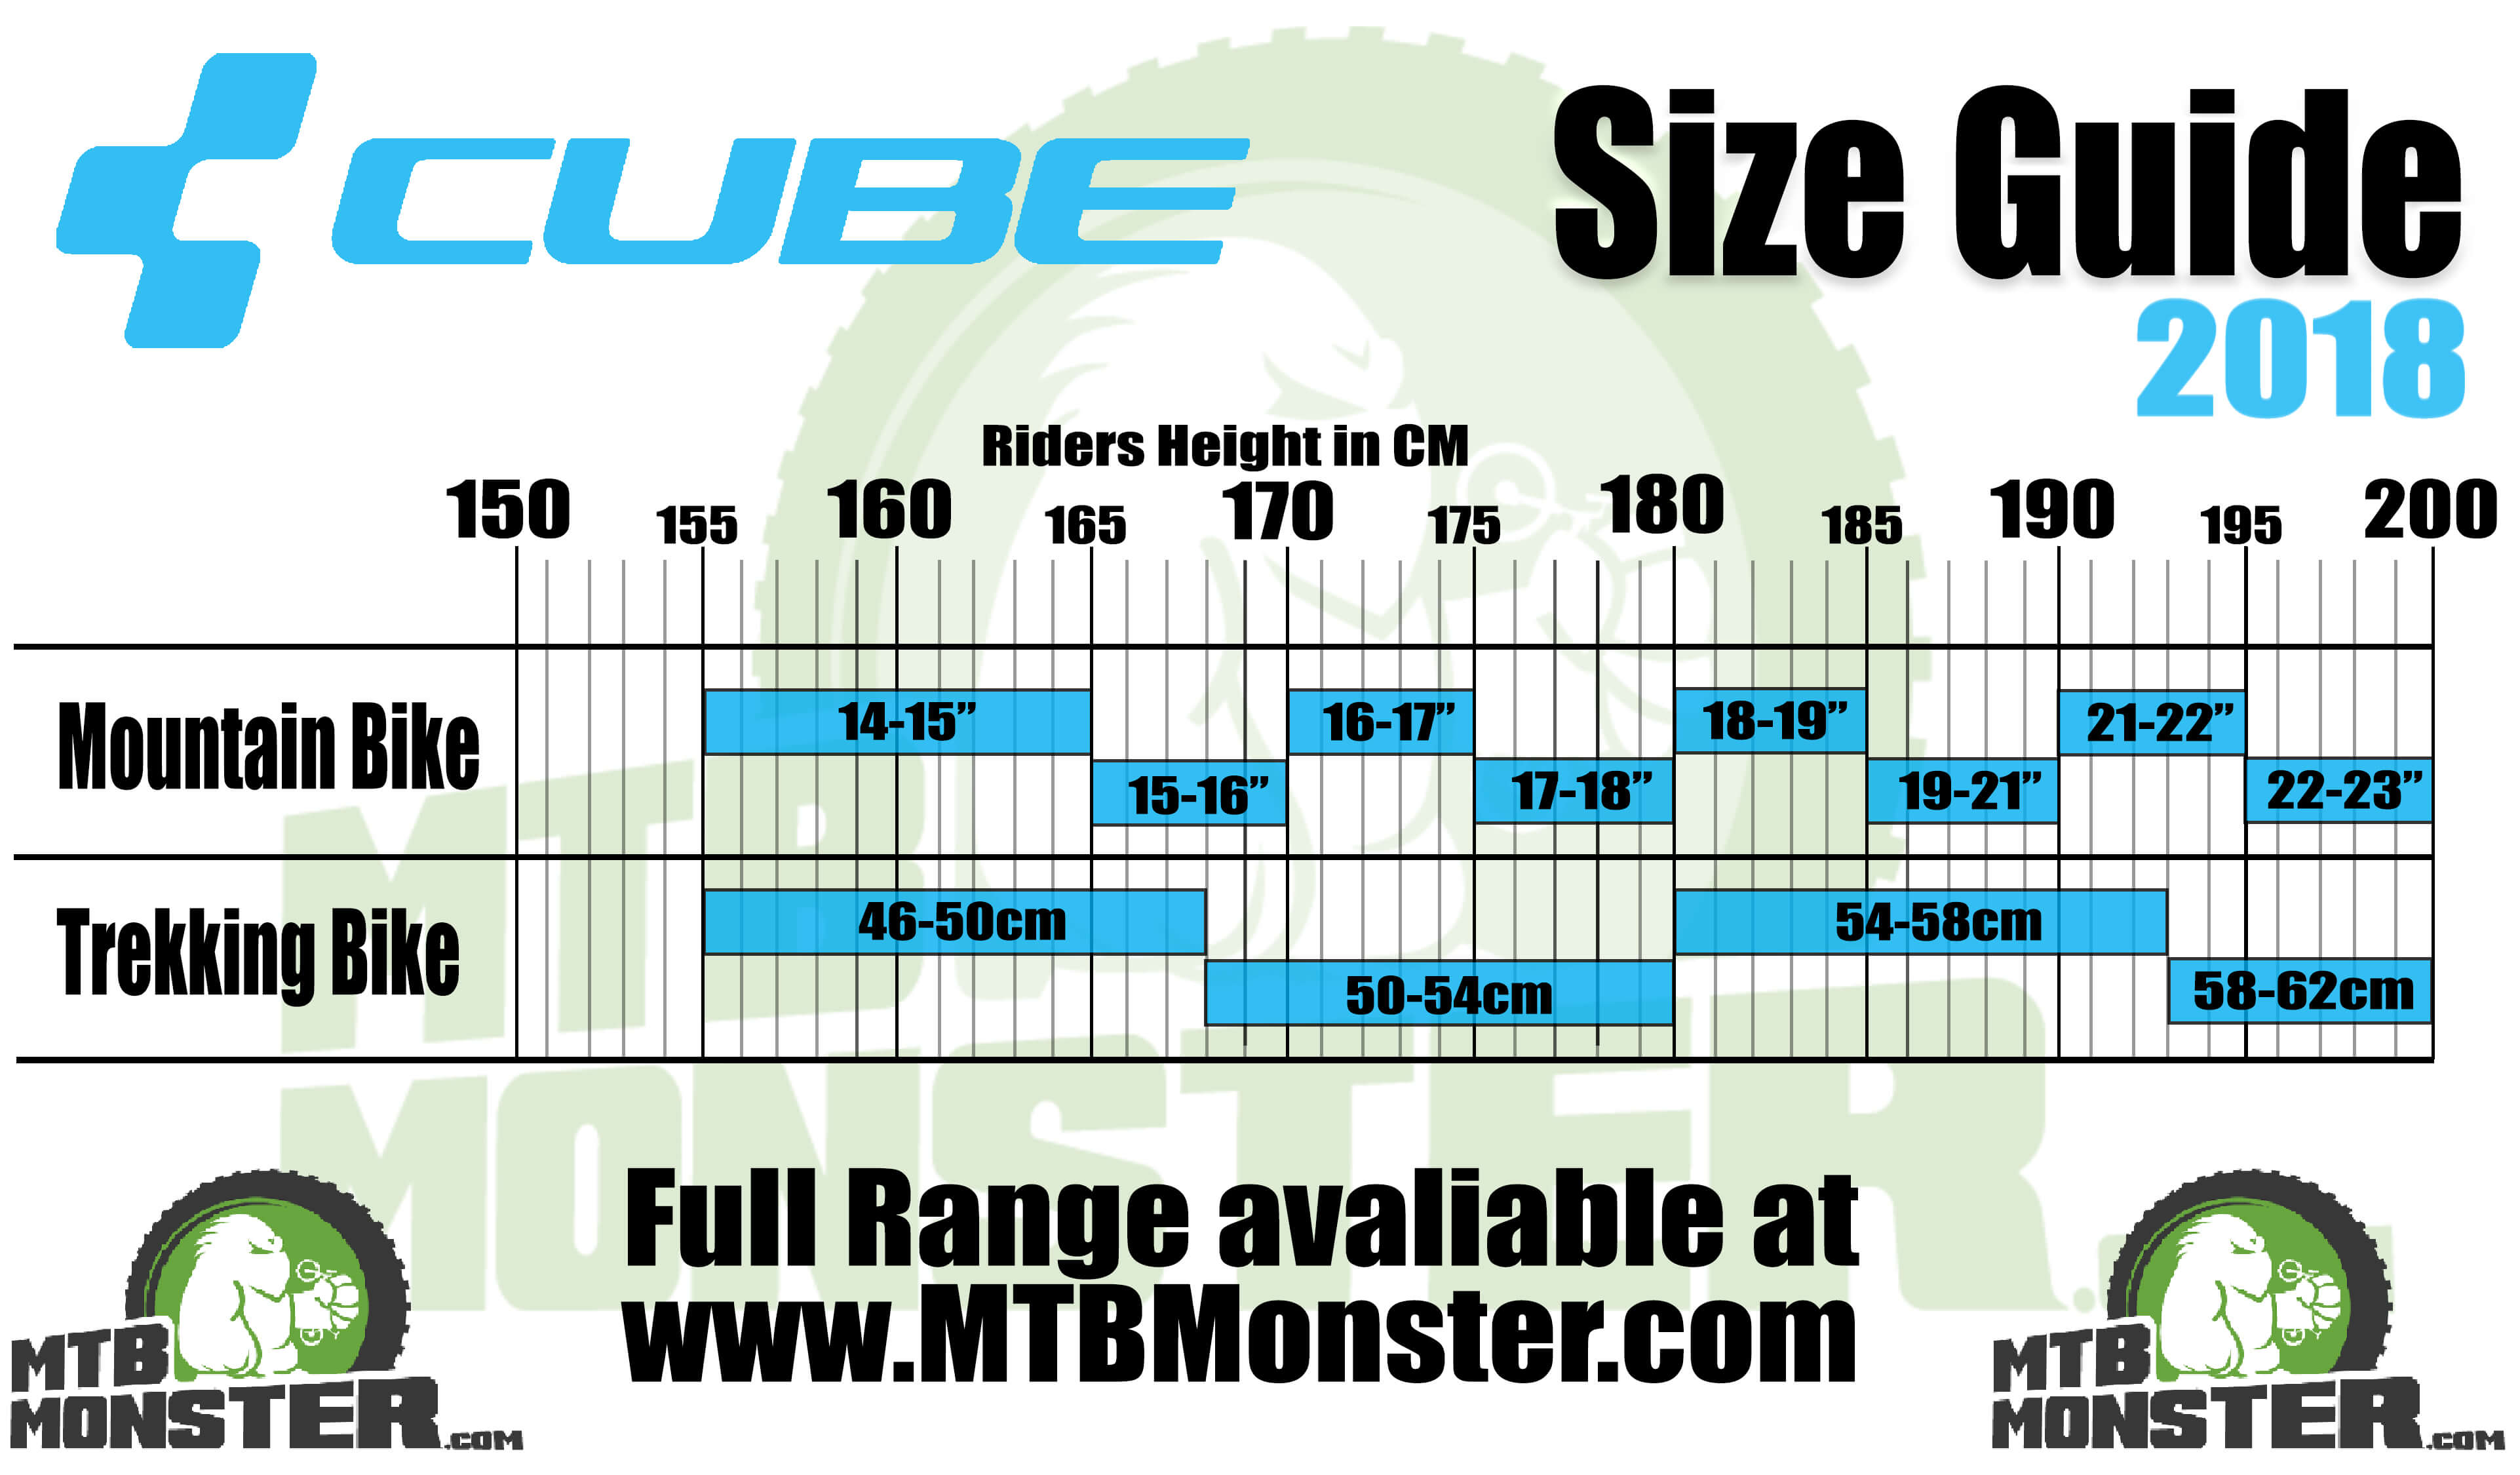 Cube Bikes Size Guide What size frame do I need?